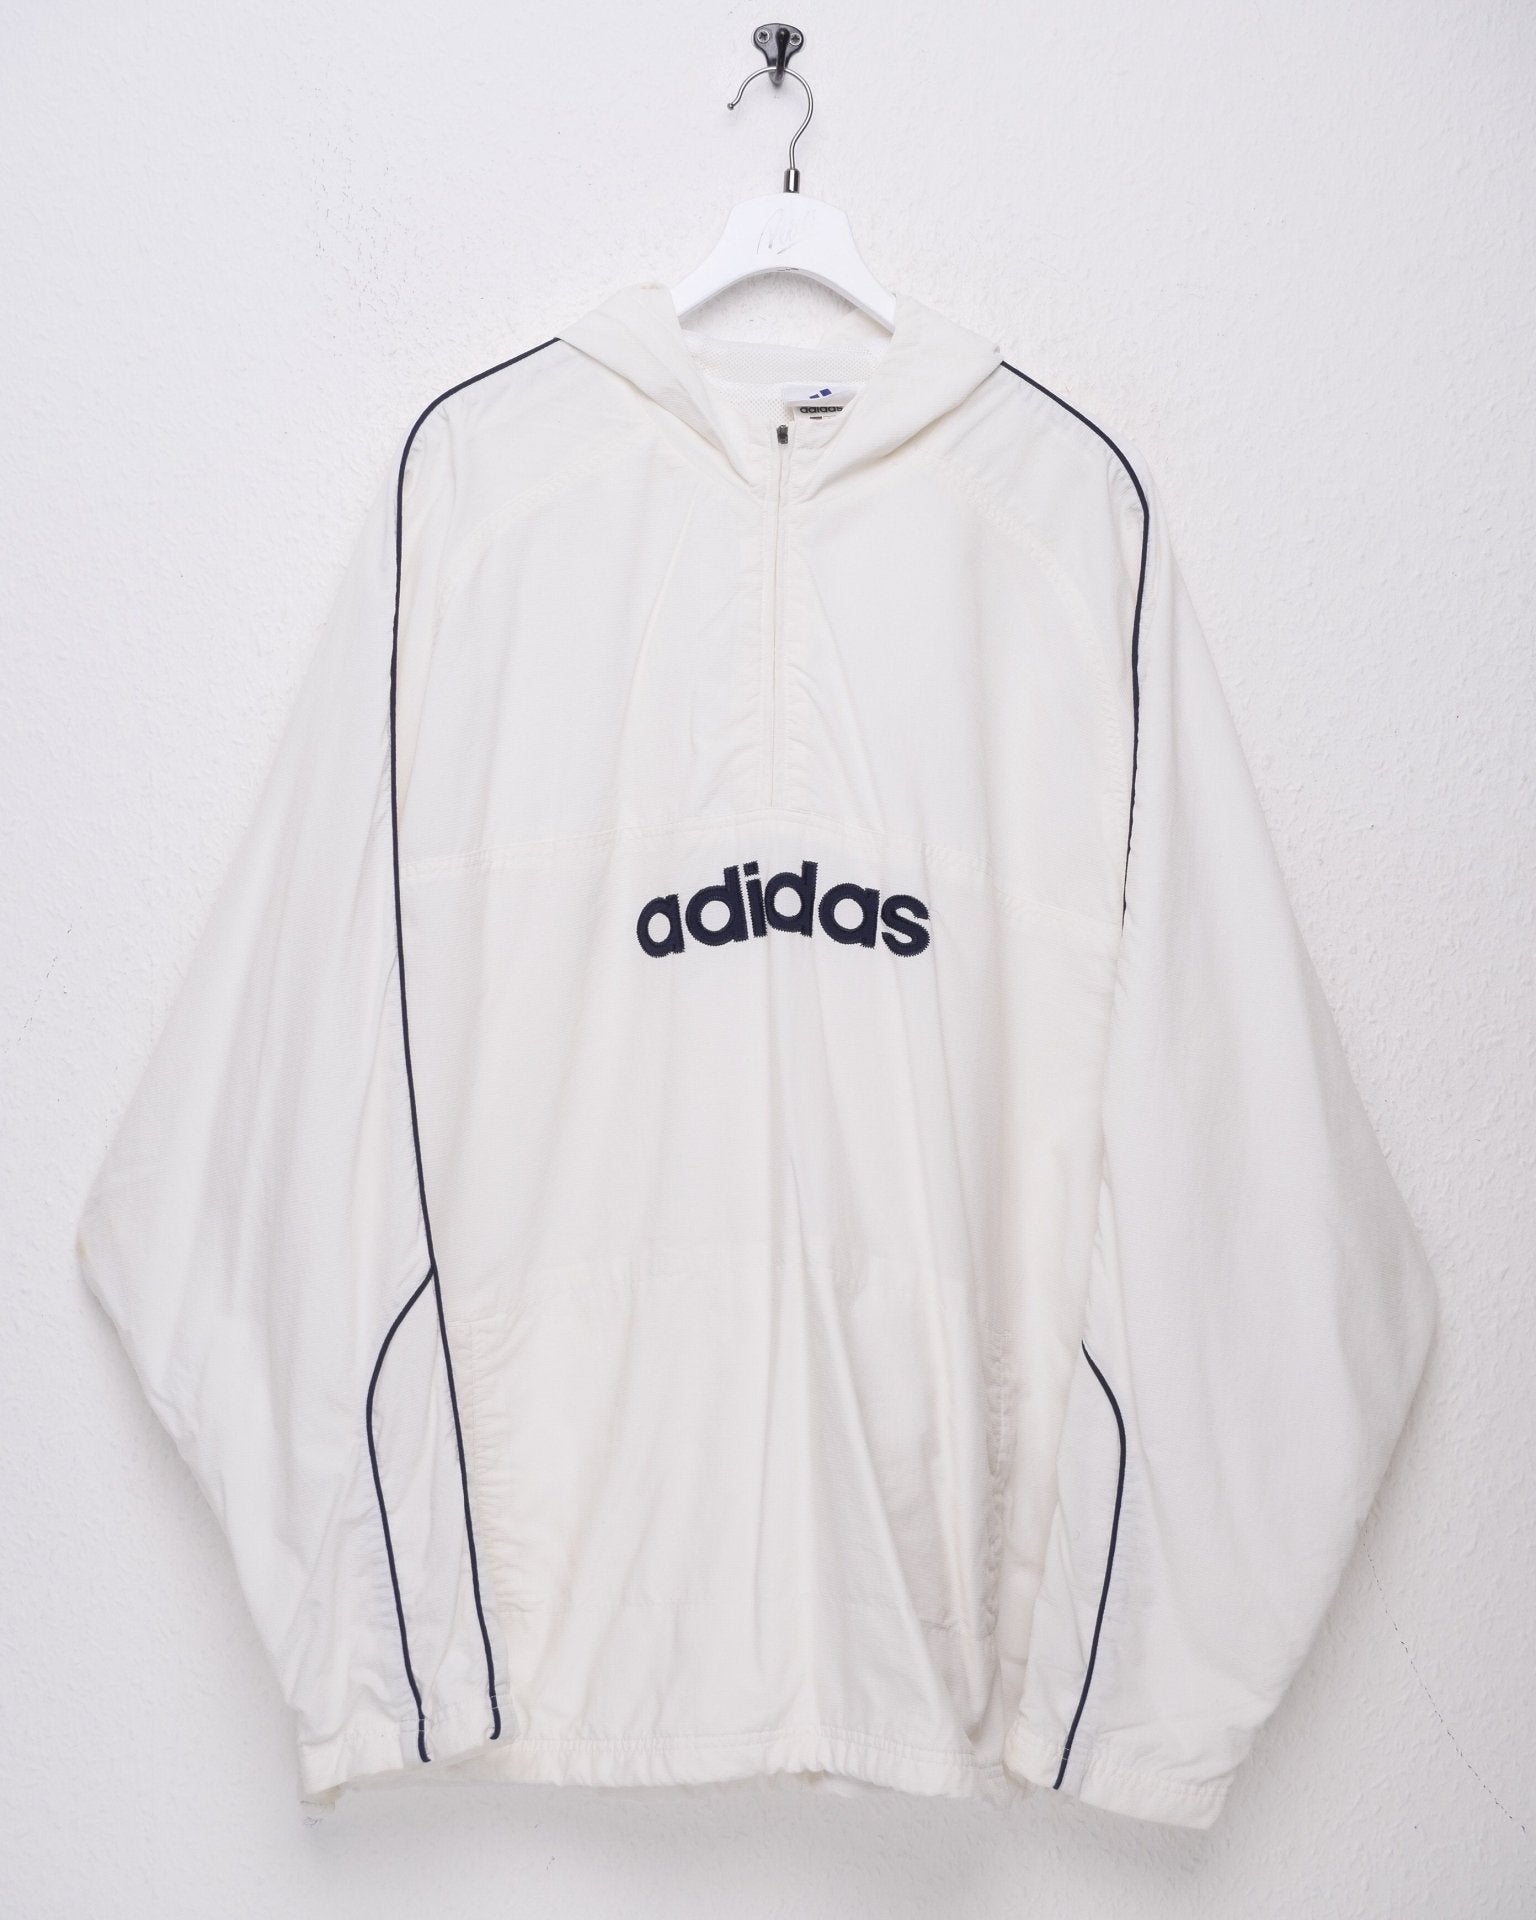 Adidas embroidered Spellout washed white Half Zip Windbreaker - Peeces